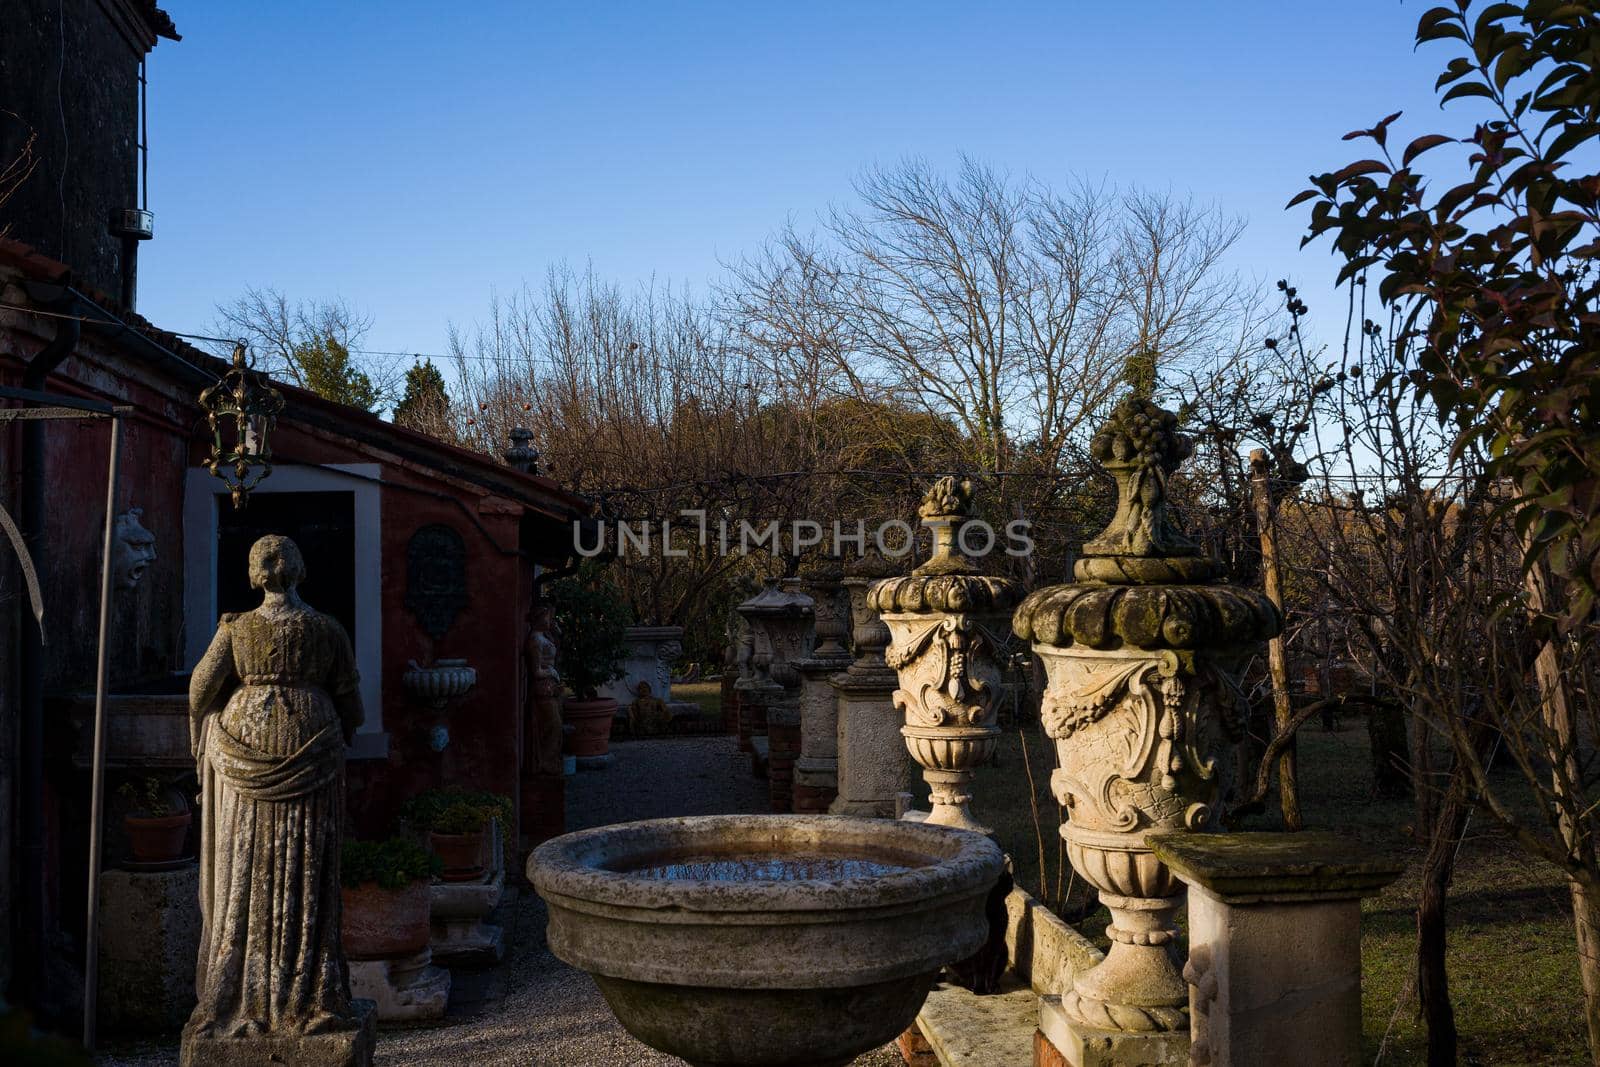 Stone sculptures in Torcello island, Italy by bepsimage